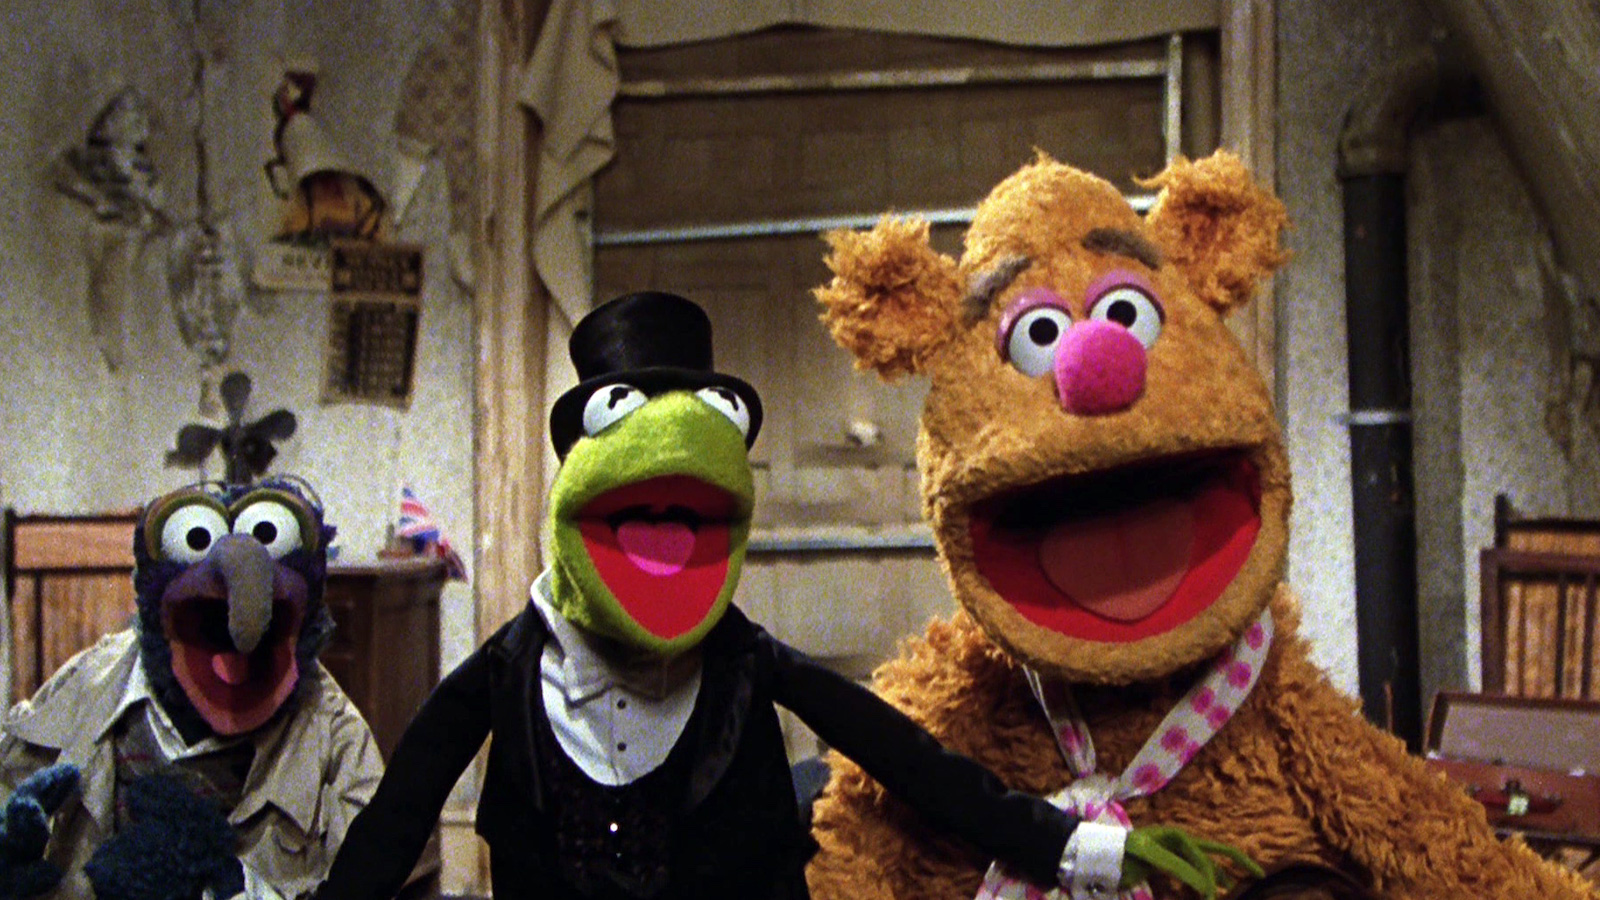 Three muppets, Gonzo, Kermit, and Fozzie Bear look at the camera, their mouths open